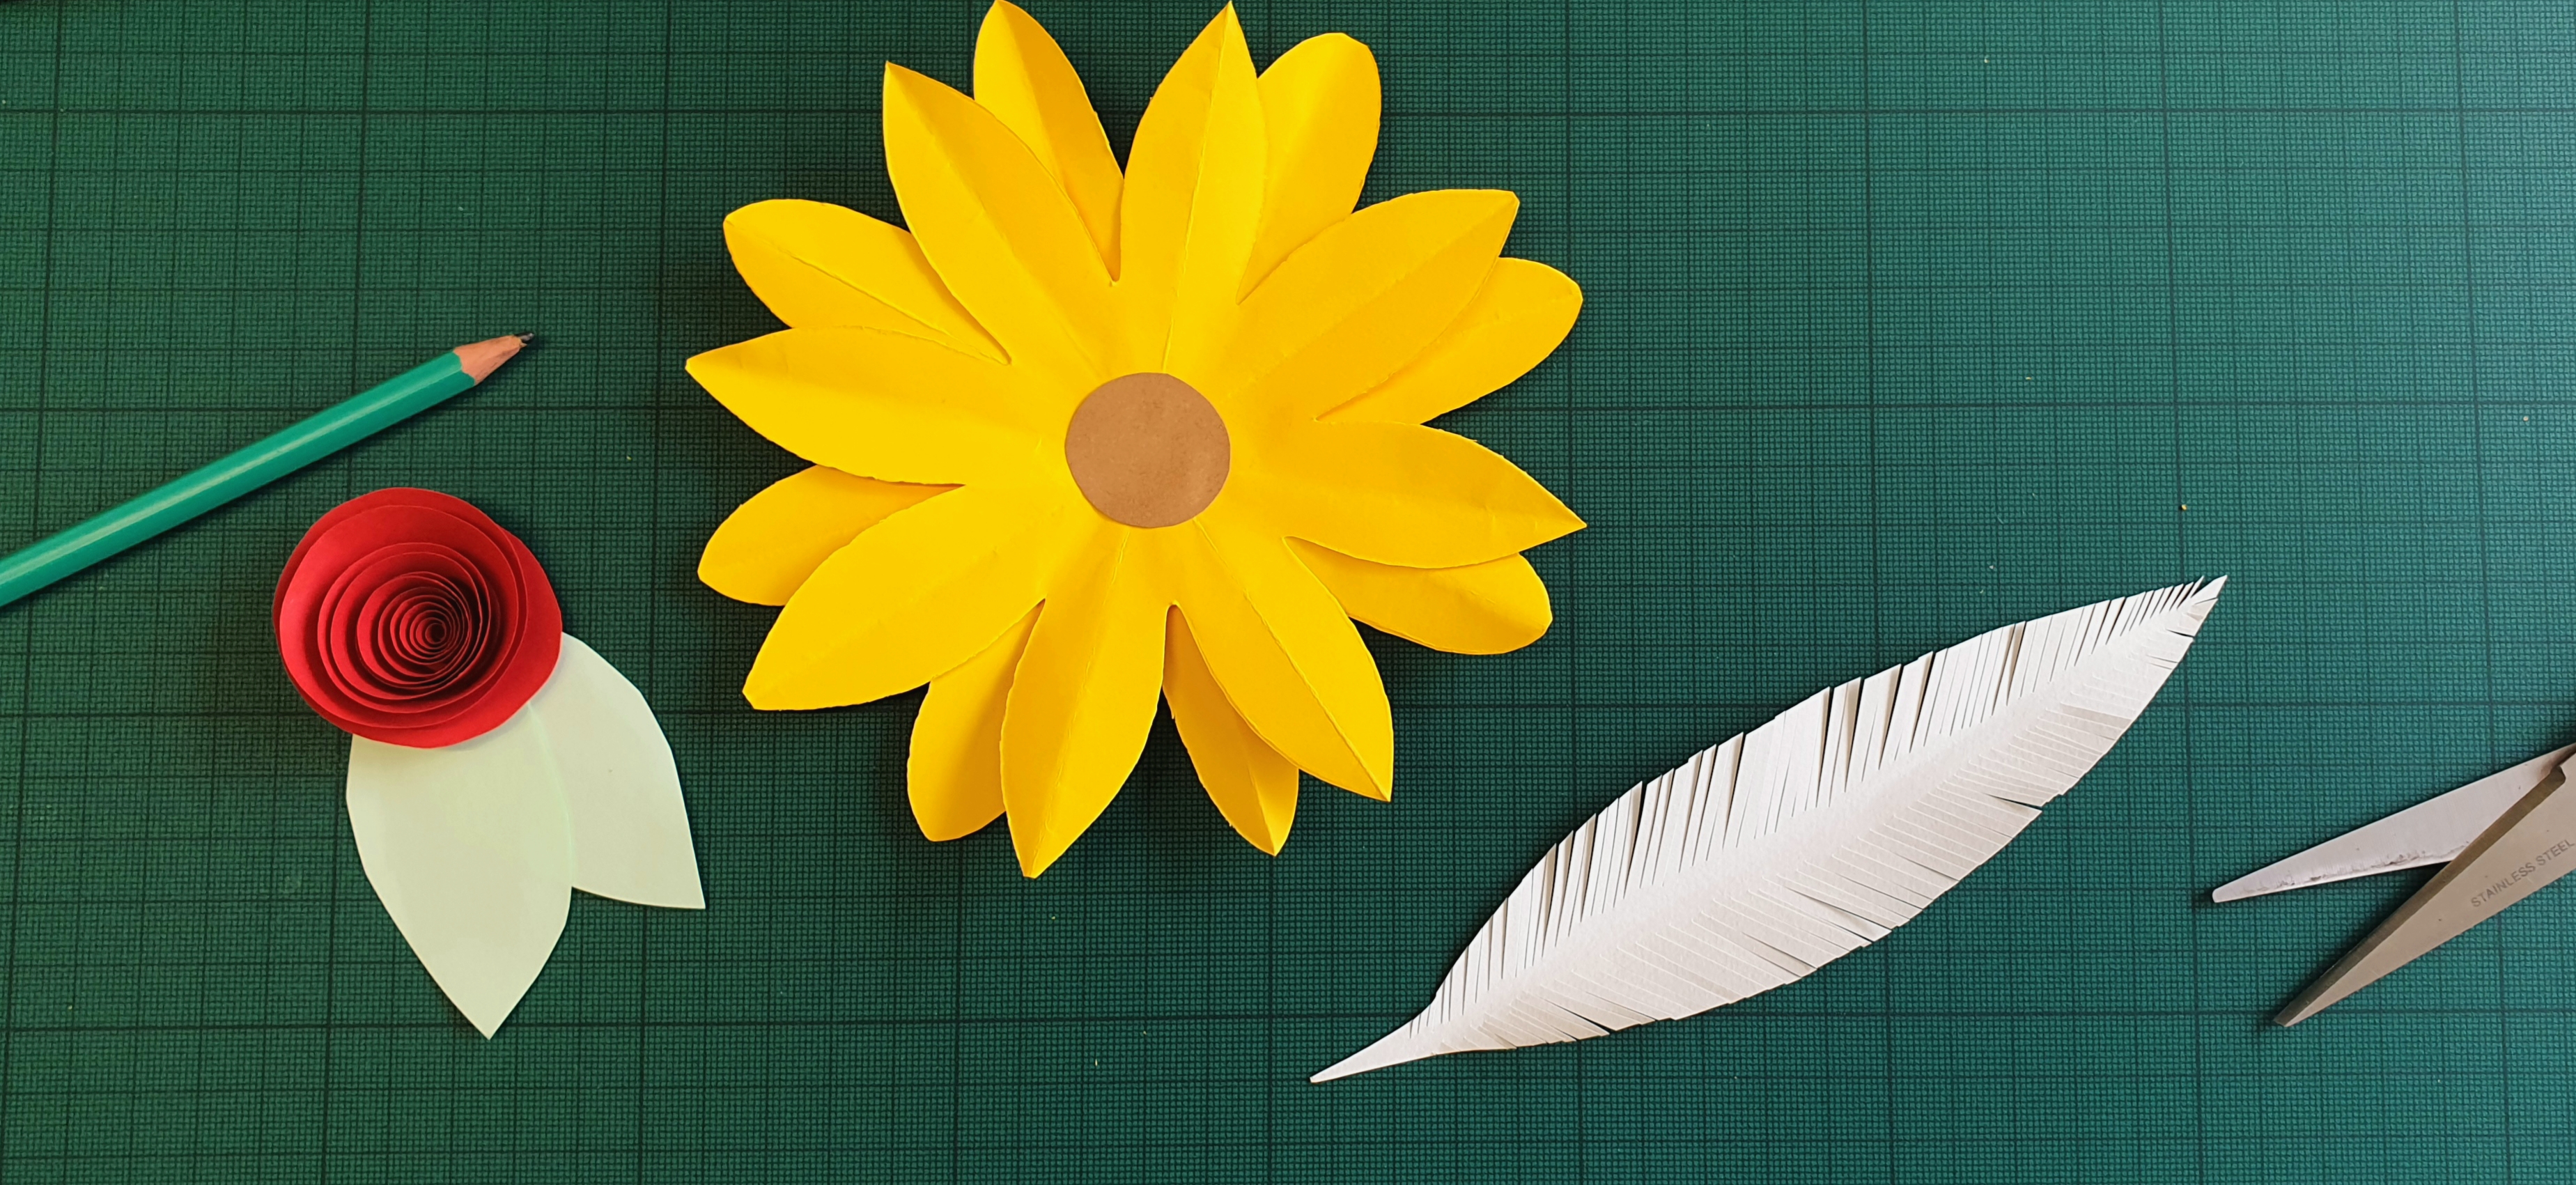 Images of paper crafted items: a sunflower, rolled rose and feather